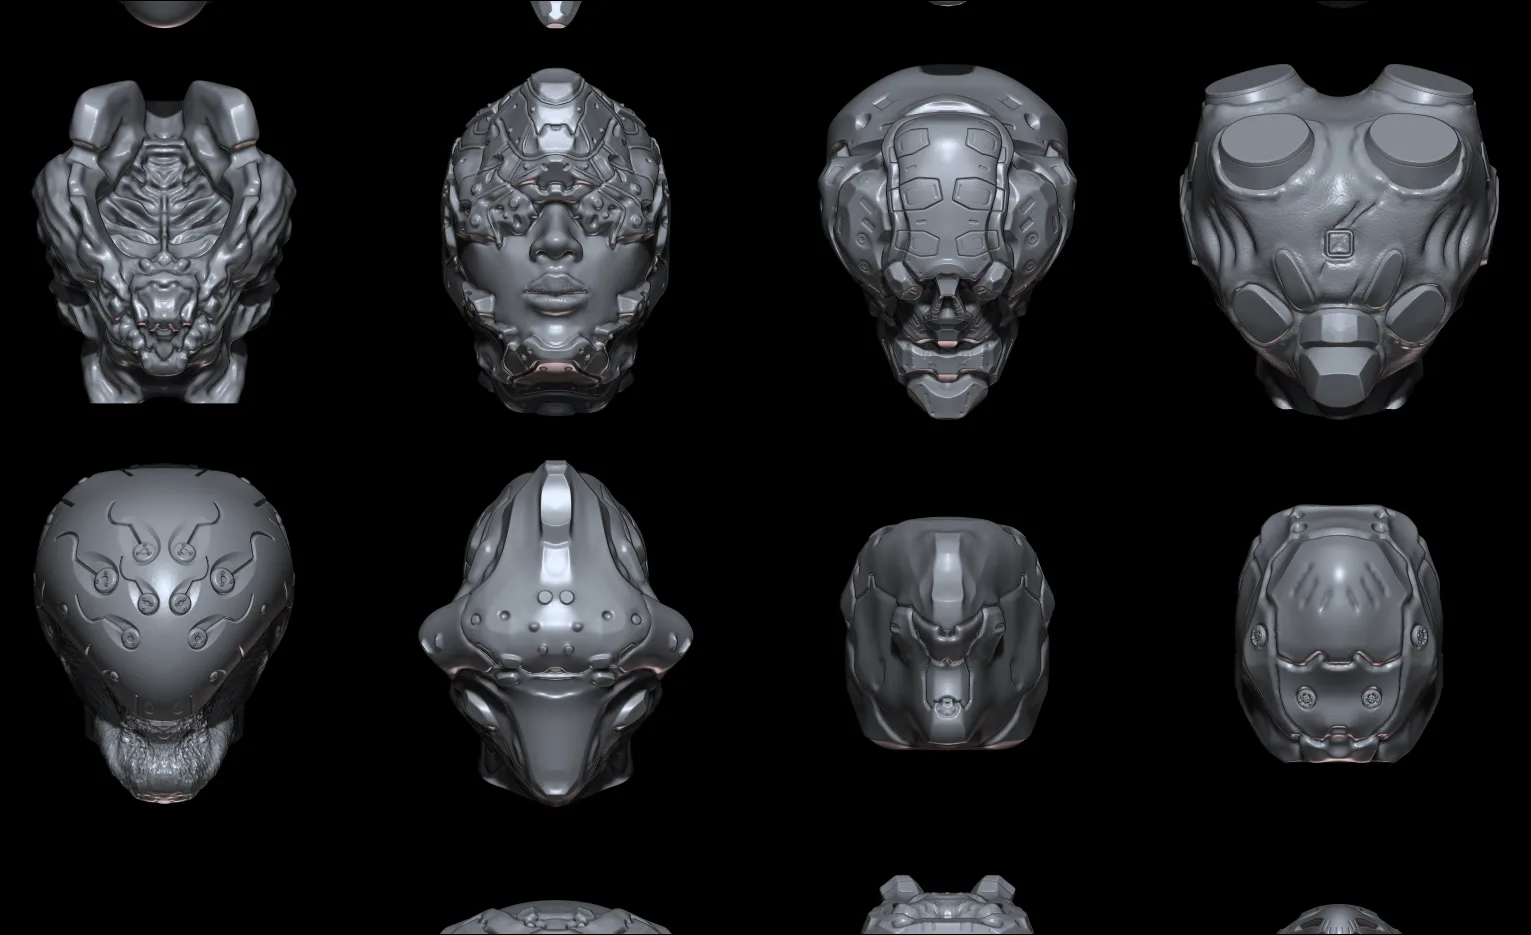 58 Mech/Horror Heads IMM-Brush For Zbrush 2021.6 - Includes OBJ and FBX Version